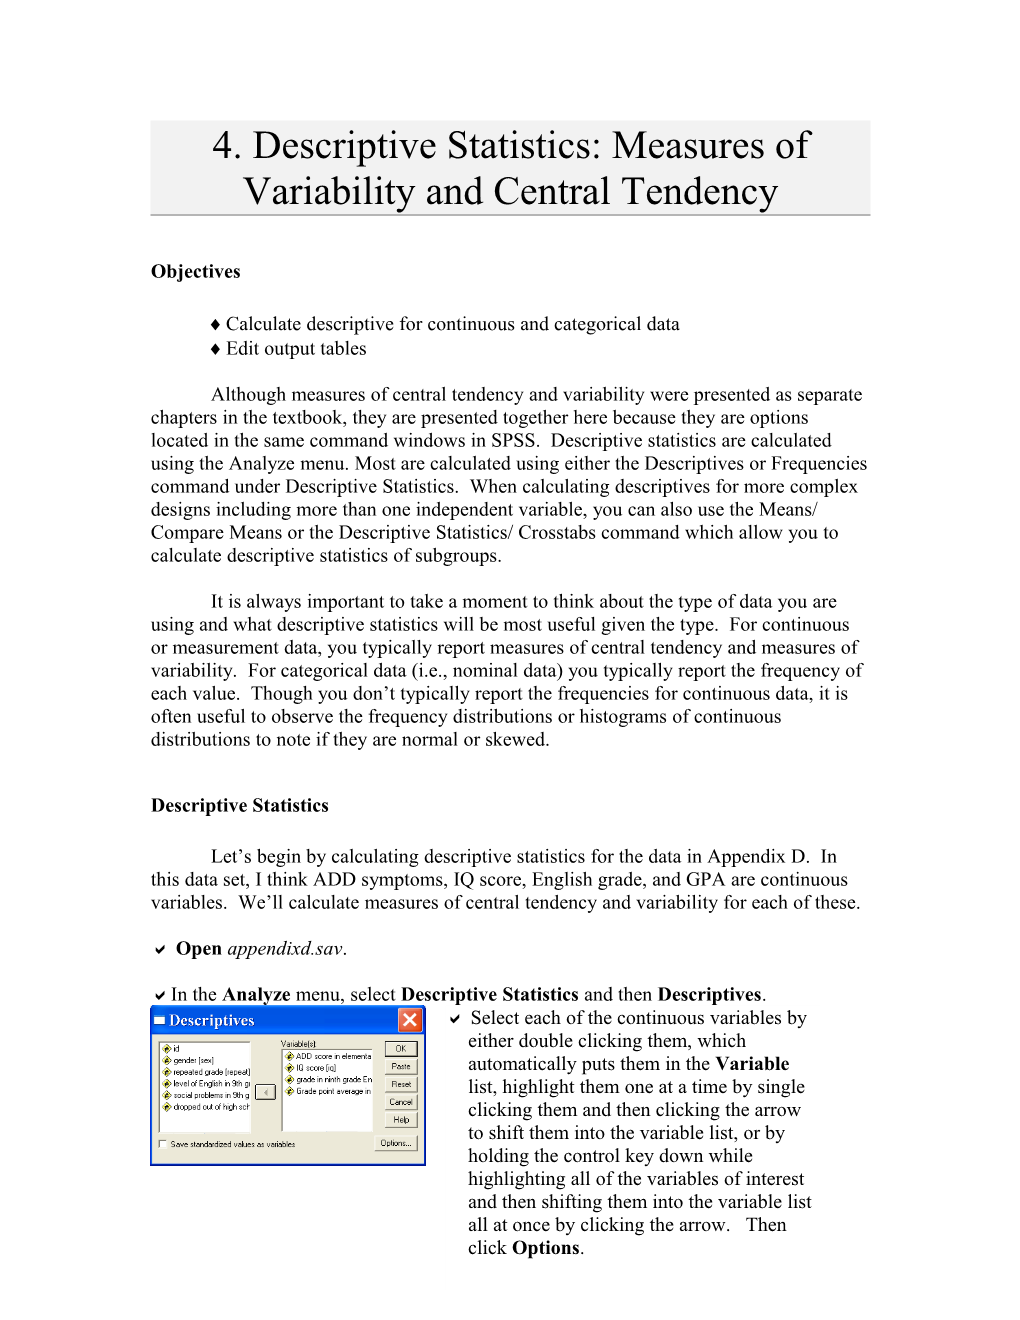 4. Descriptive Statistics: Measures of Variability and Central Tendency